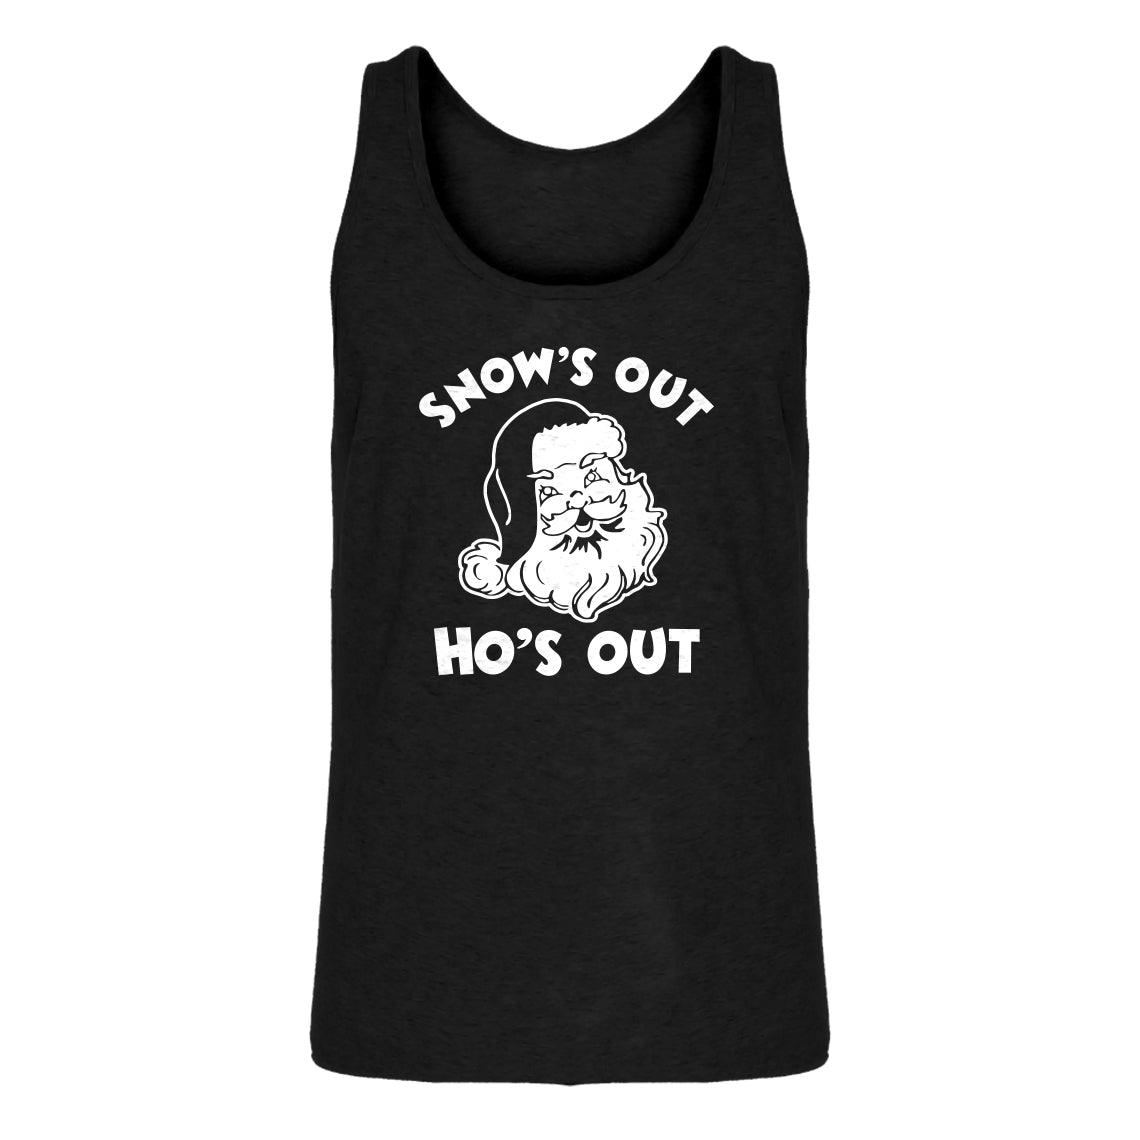 Mens Snows Out Ho's Out Jersey Tank Top